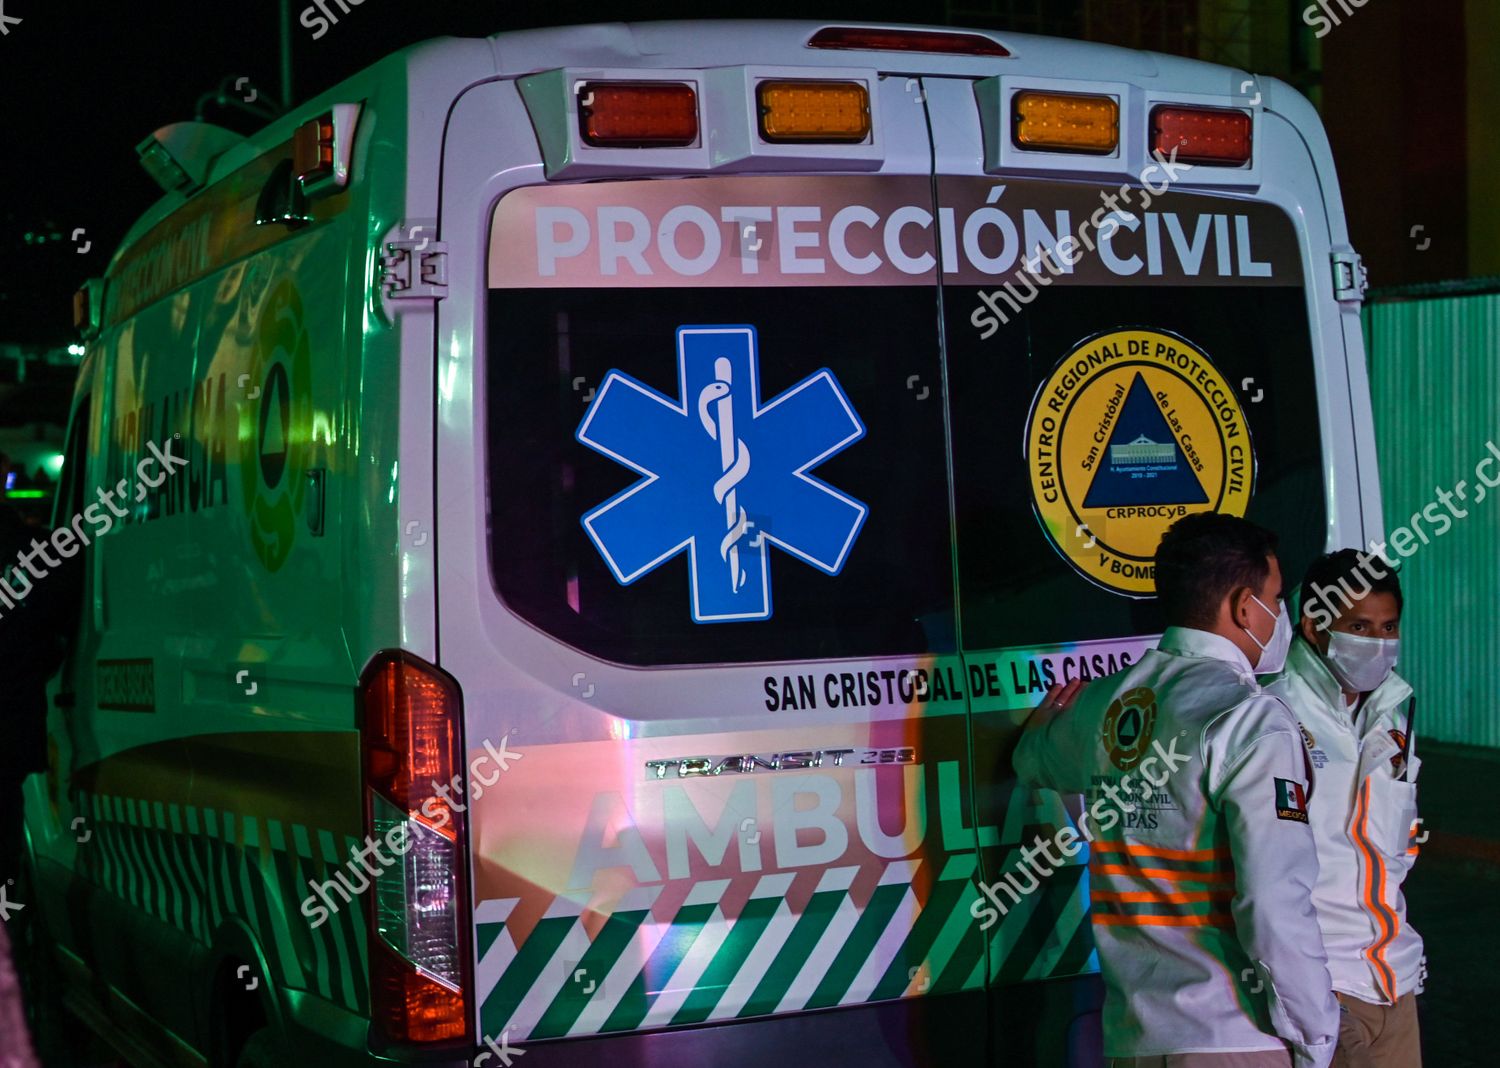 Ambulance Mexican Civil Protection Seen Center Editorial Stock Photo -  Stock Image | Shutterstock